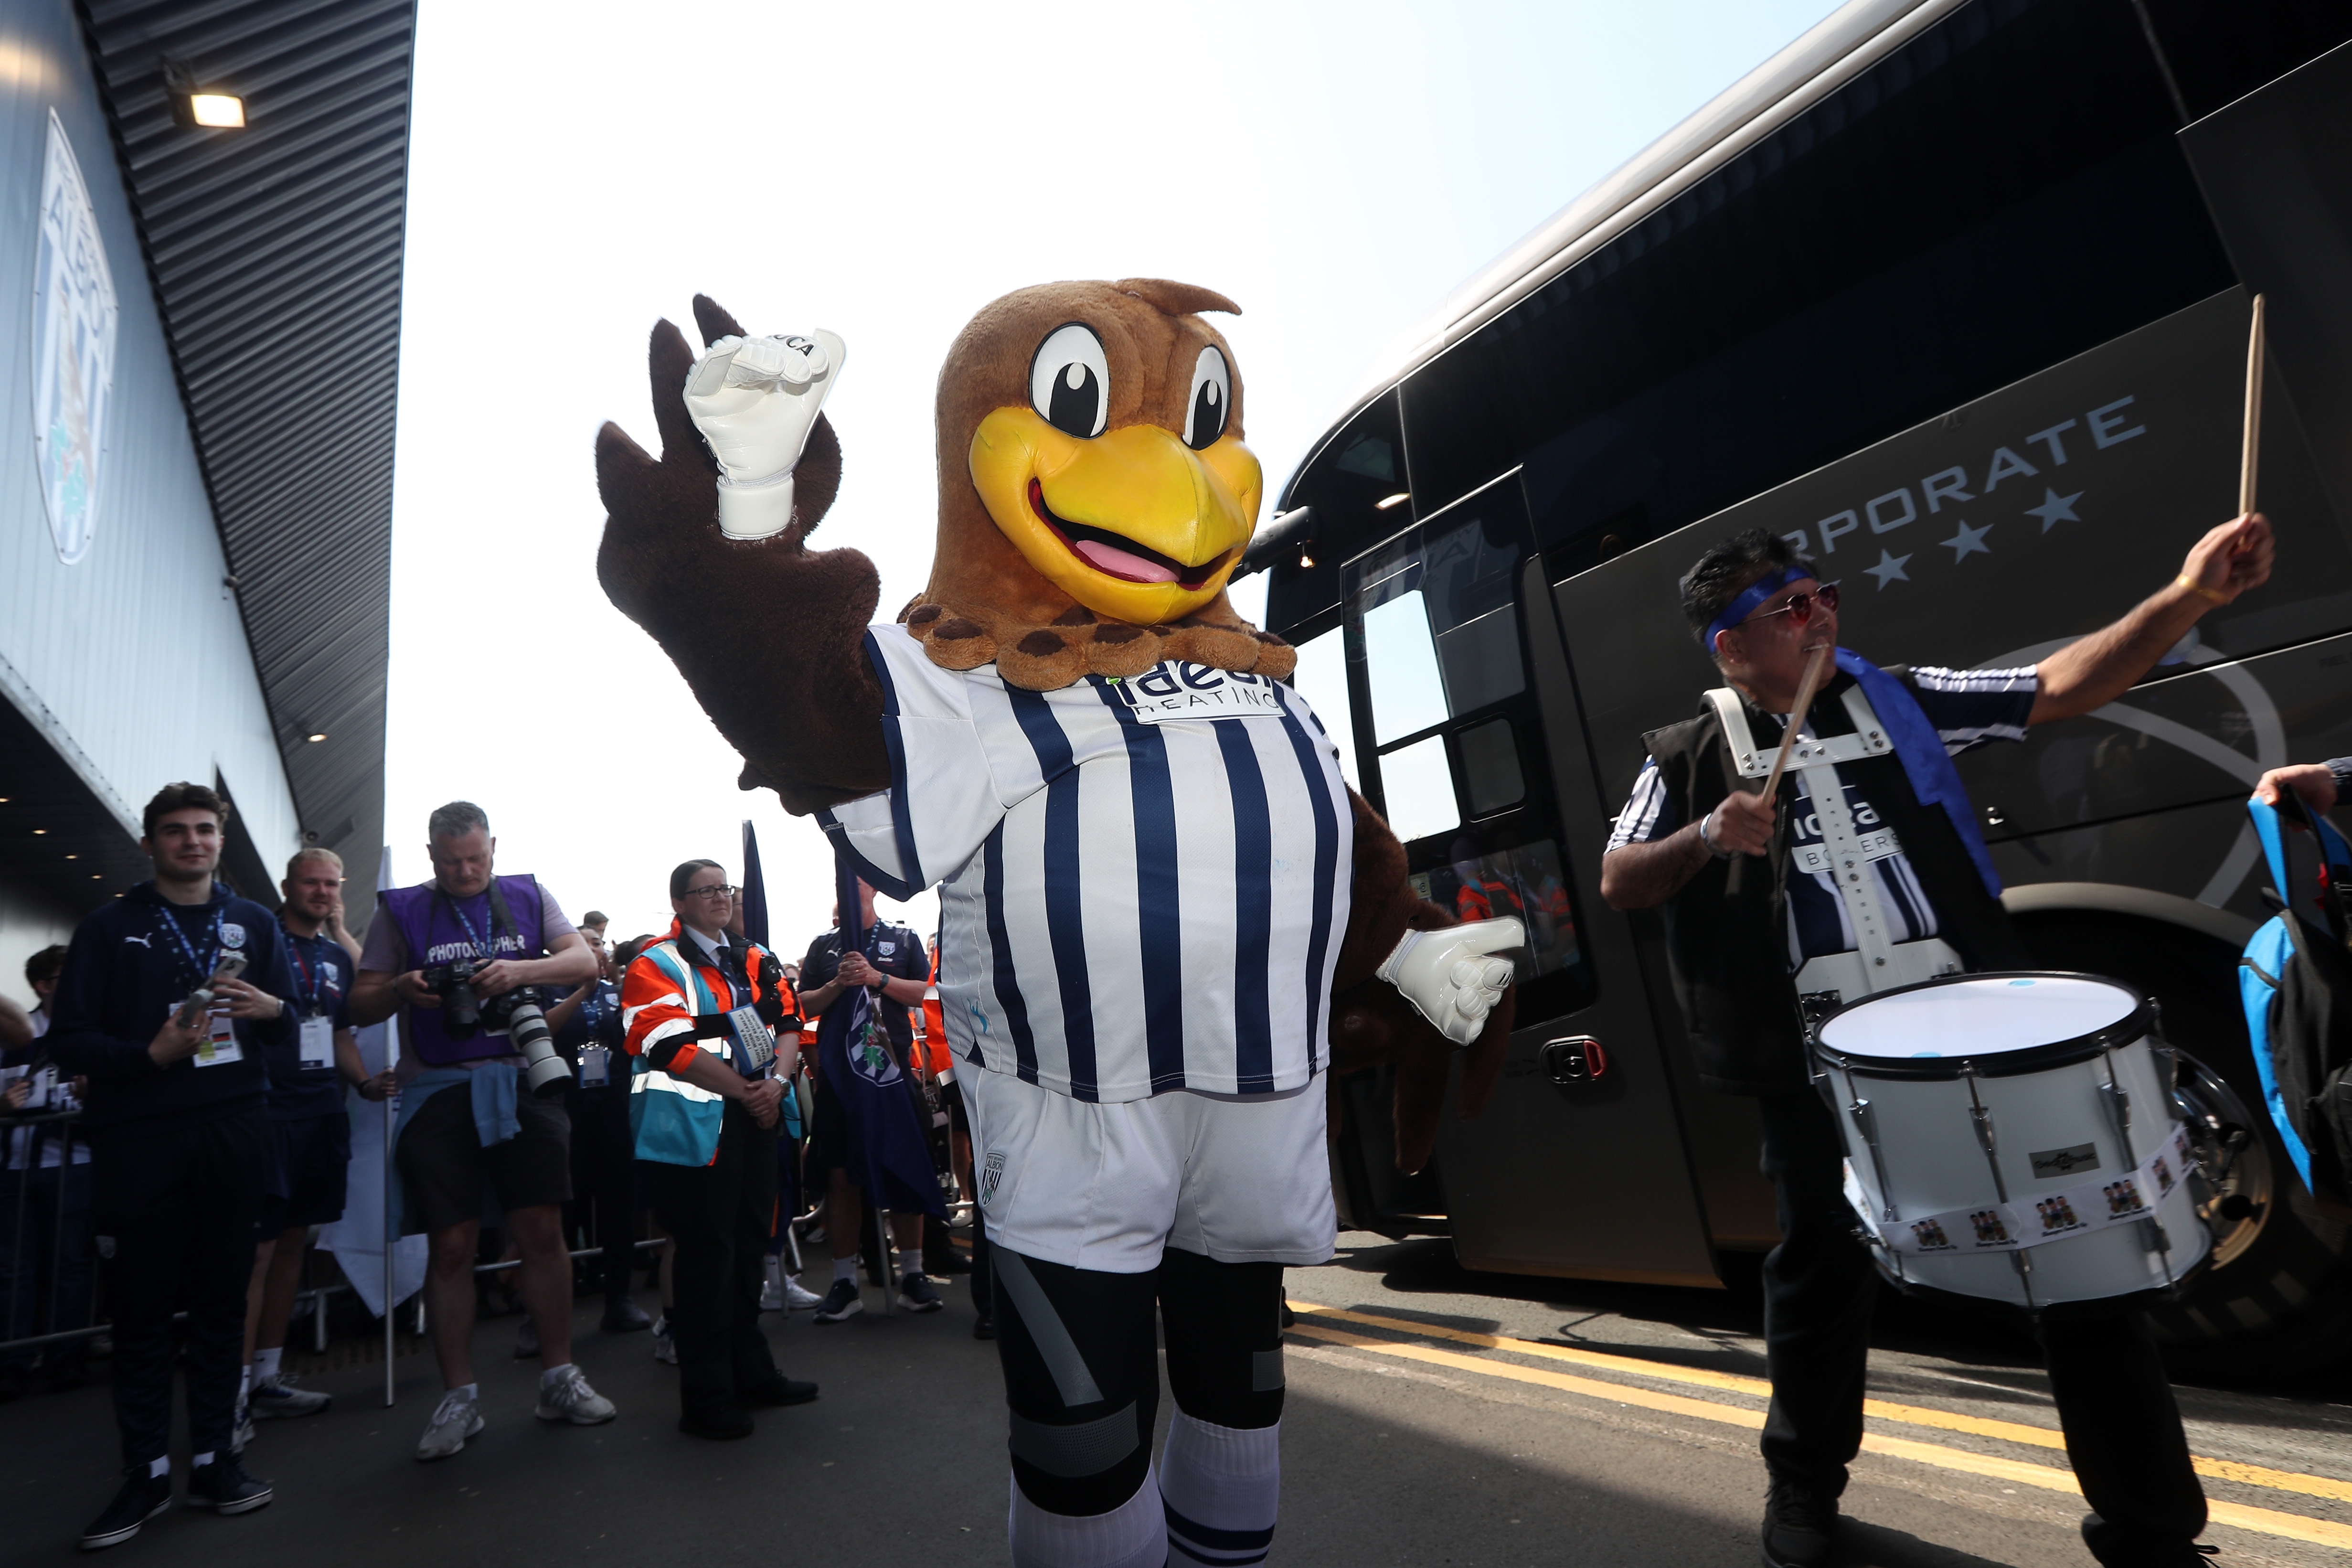 Baggie Bird dancing at The Hawthorns before the game against Southampton